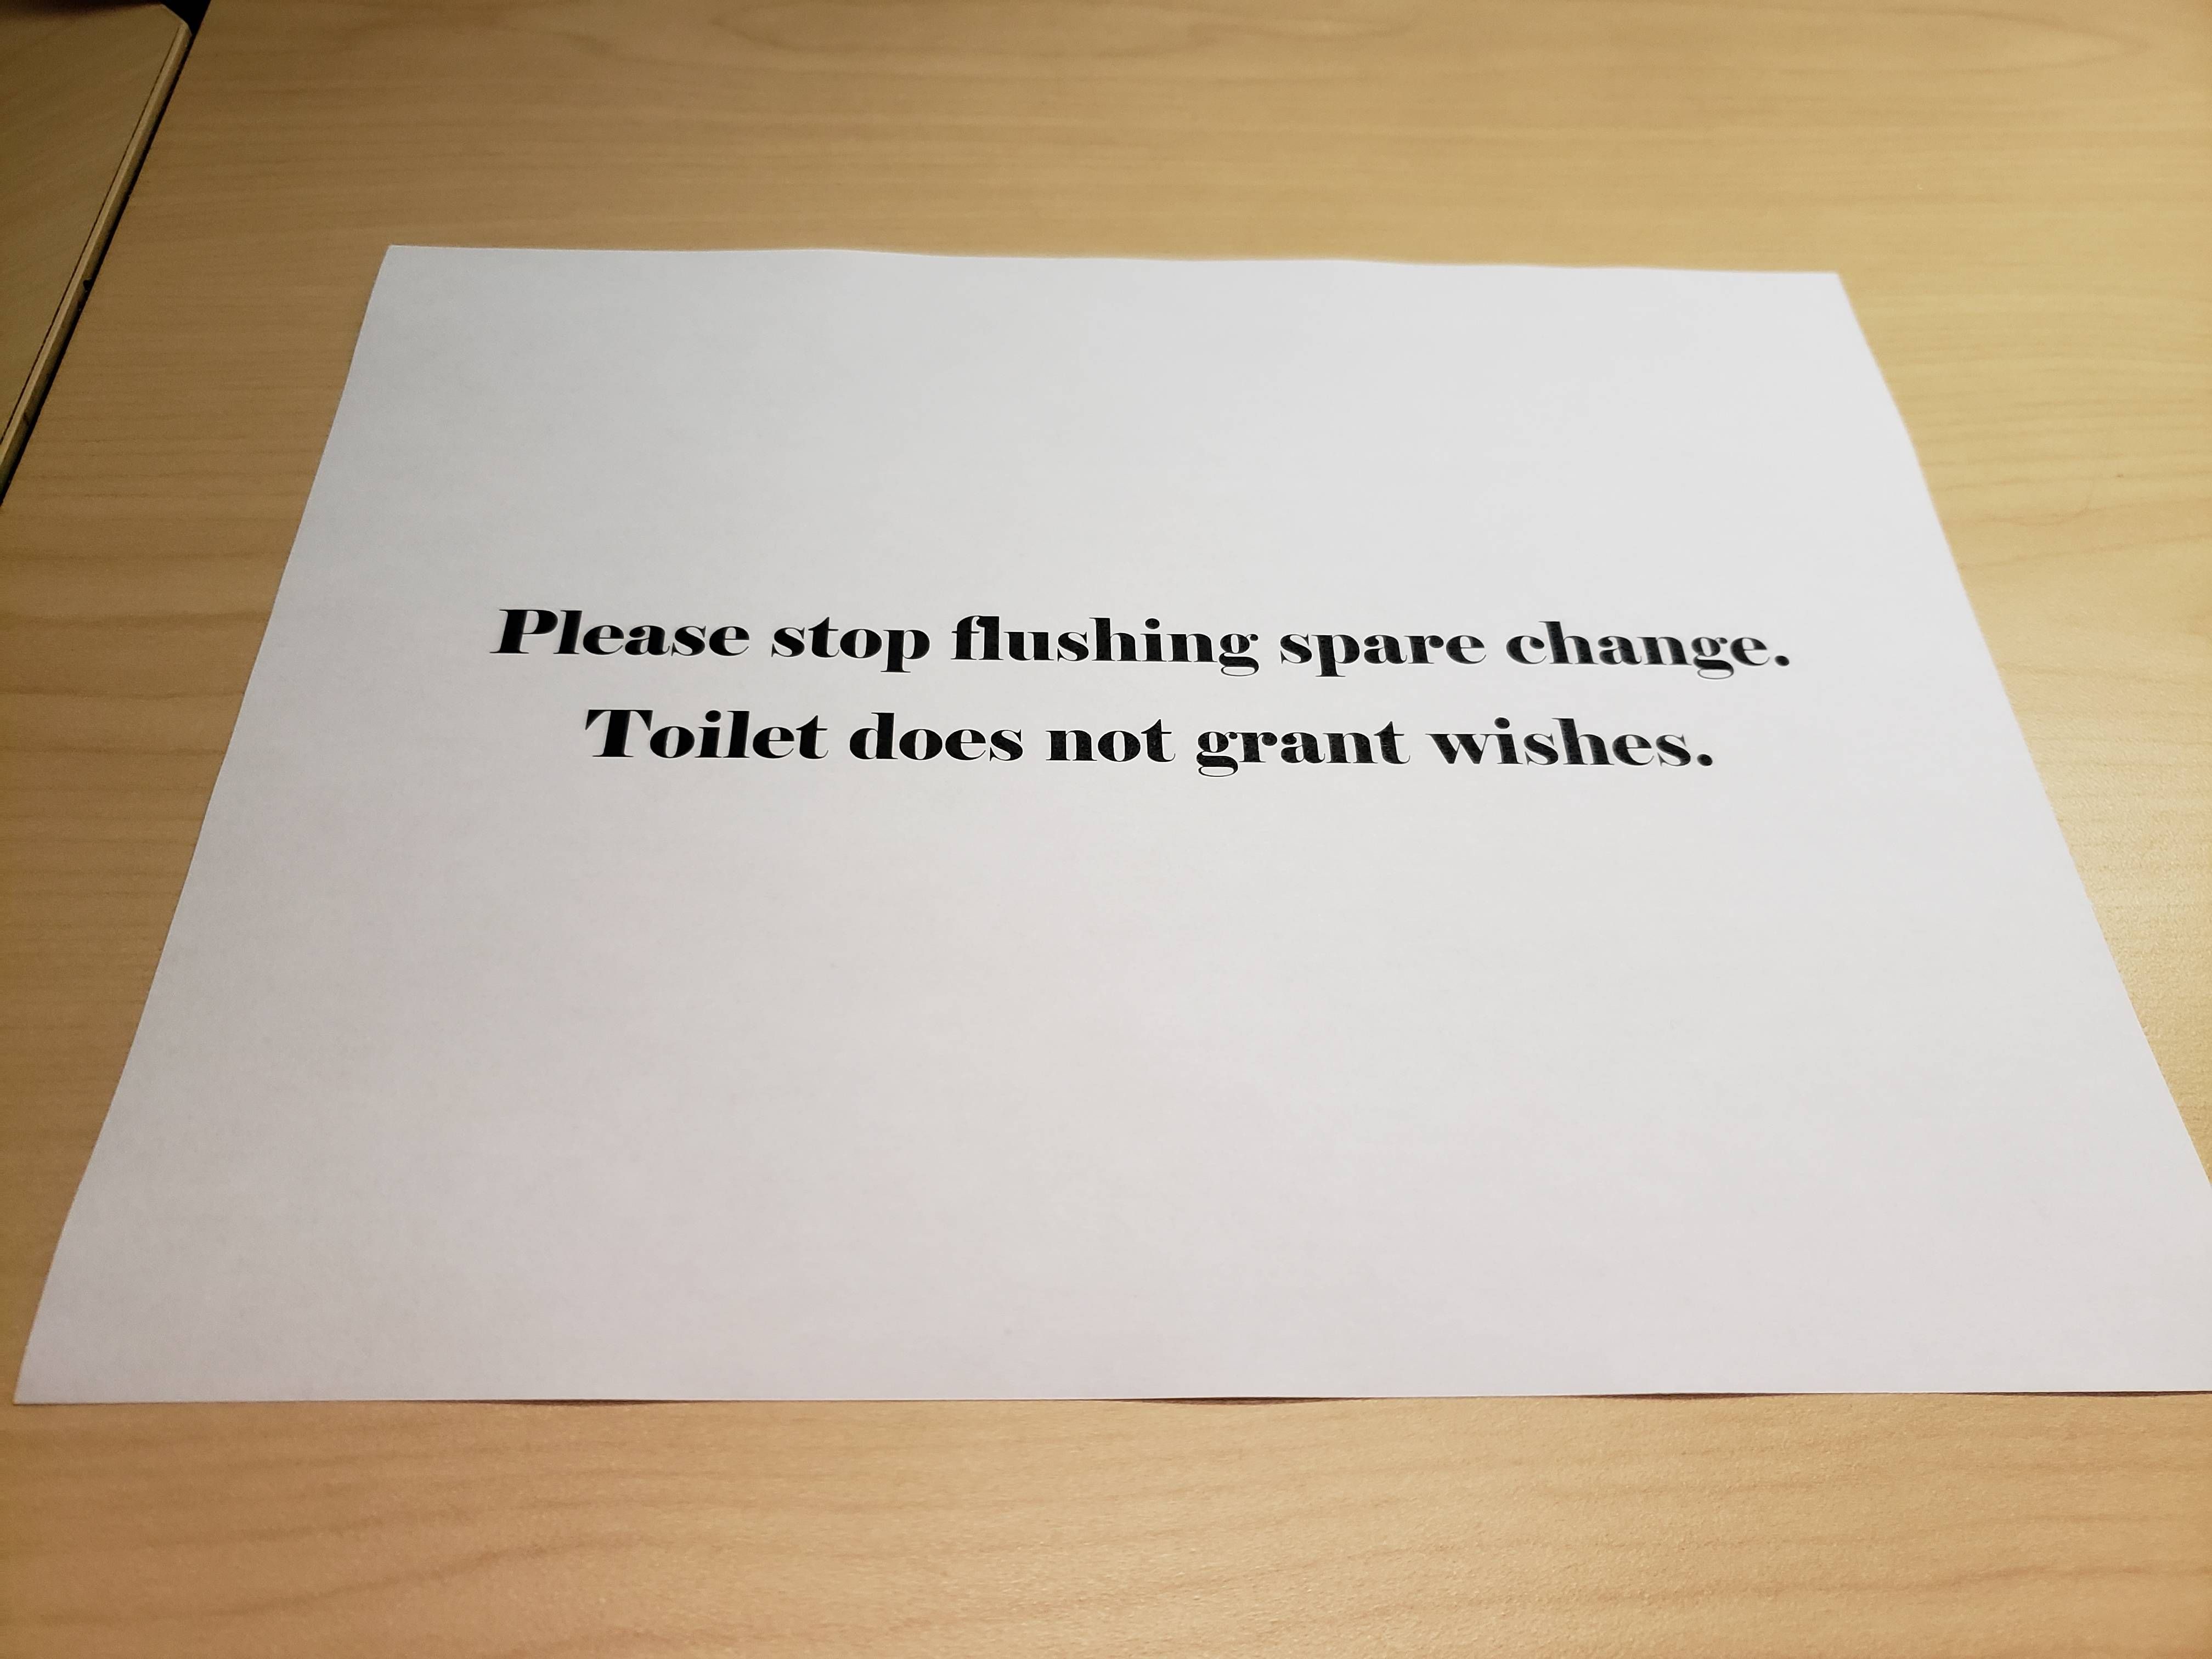 Someone keeps flushing coins down the toilet at work so I had to make a bathroom sign